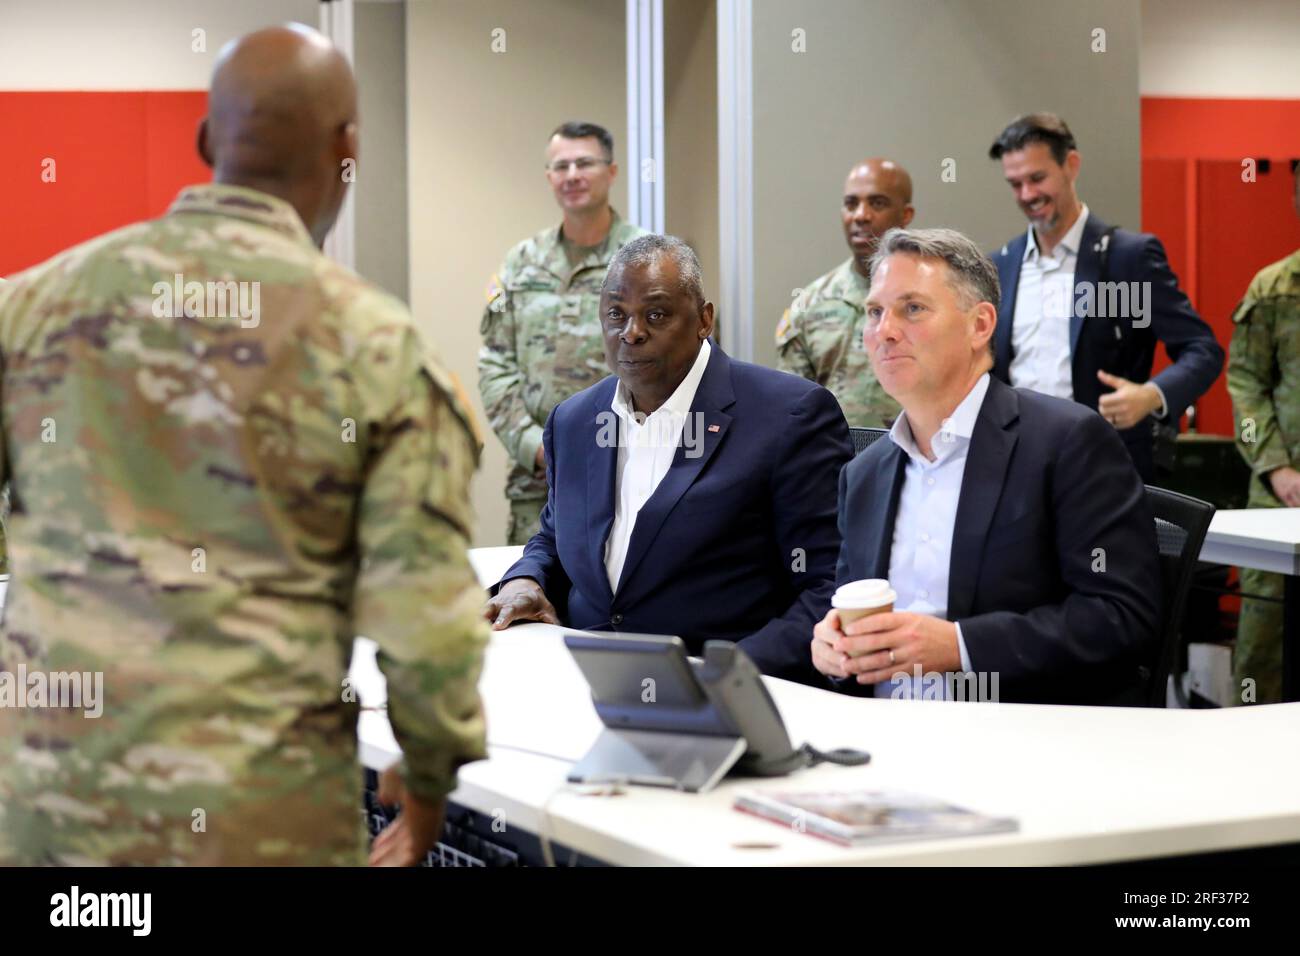 Townsville, Australia. 30th July, 2023. Australian Defense Minister Richard Marles, right, and U.S Secretary of Defense Lloyd Austin, center, are briefed by U.S Army Lt. Gen. Xavier Brunson, left, on the multilateral military exercise Talisman Sabre at Lavarack Barracks, July 30, 2023 in Townsville, Queensland, Australia. Credit: Sgt 1C John Healy/U.S. Army Photo/Alamy Live News Stock Photo